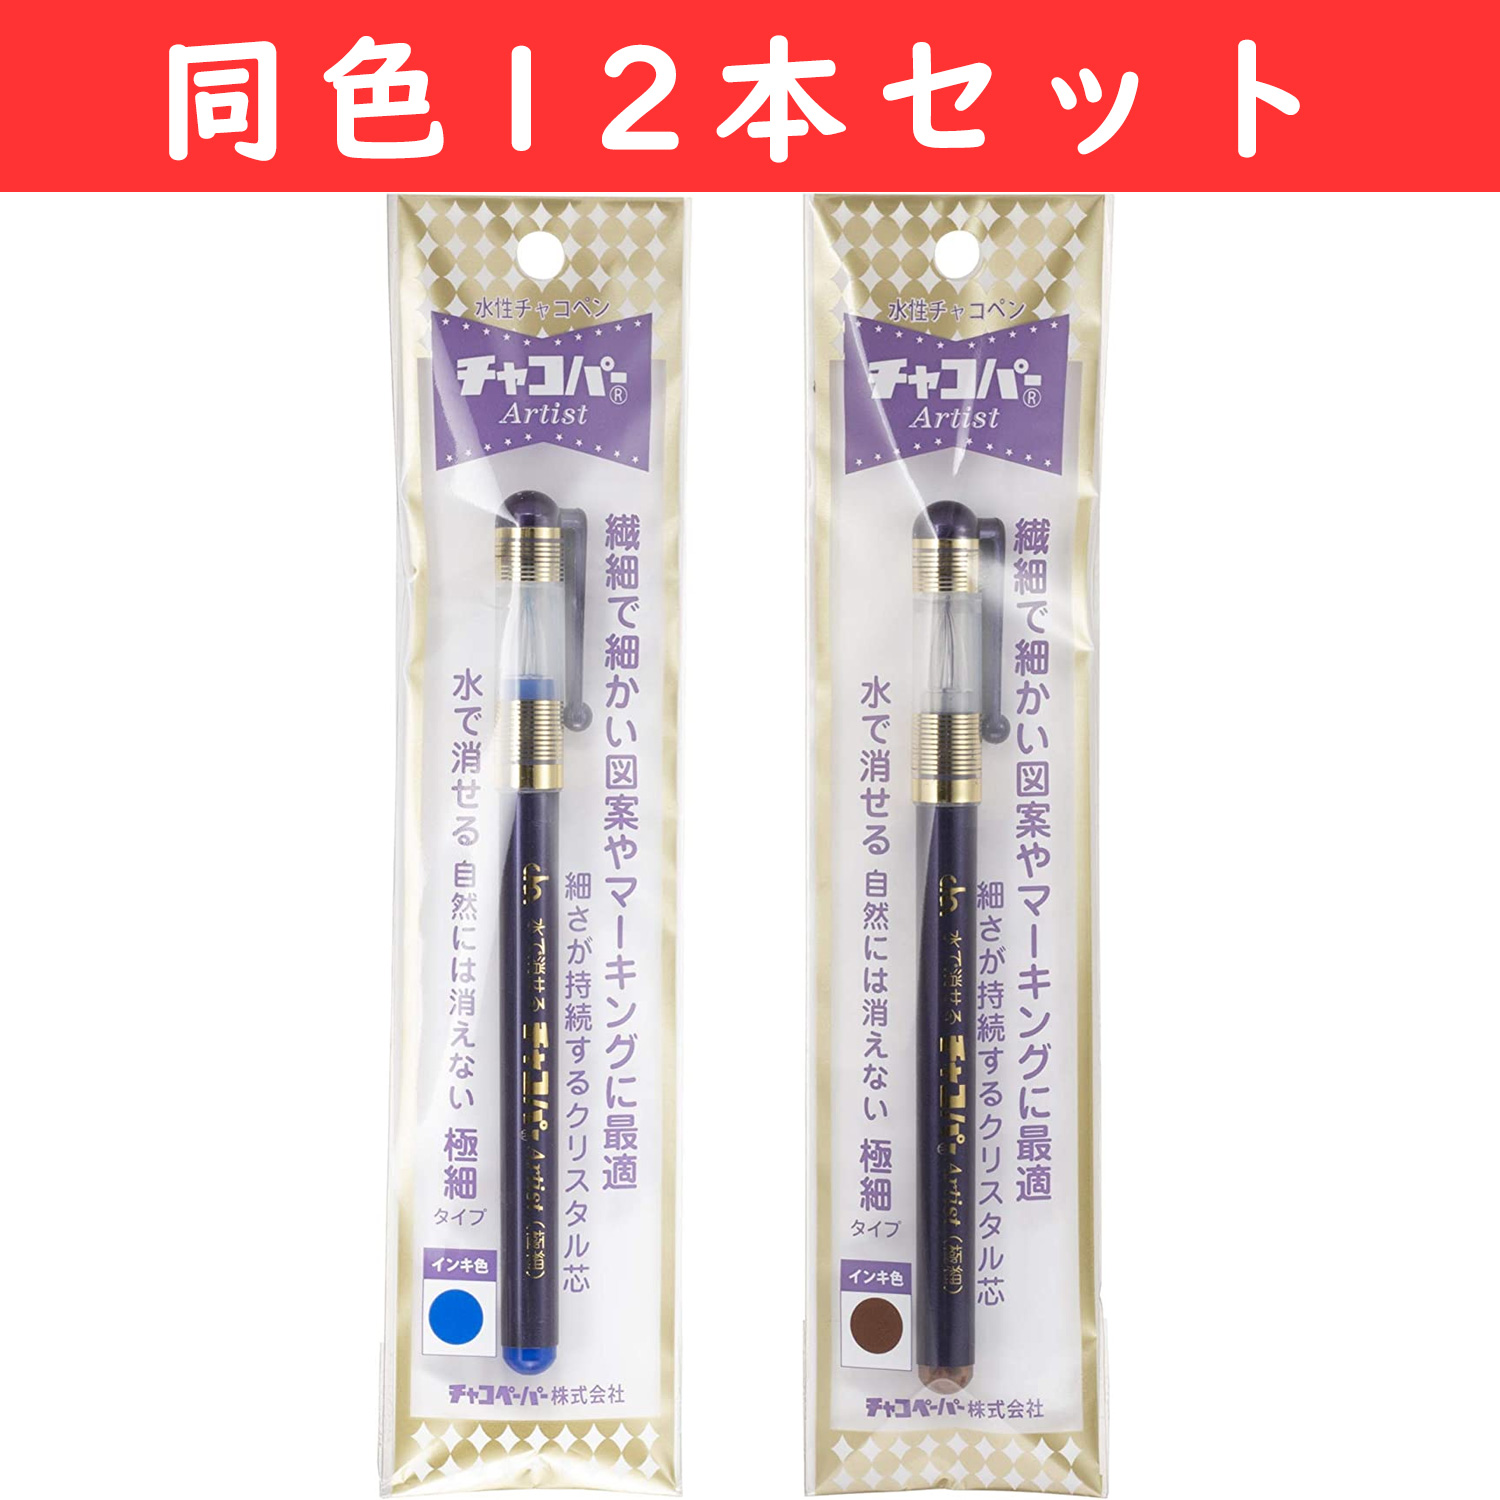 F10 Water-based Fabric Pen Chacopa Artist Super Thin Length 14cm 12pcs of the same color (set)